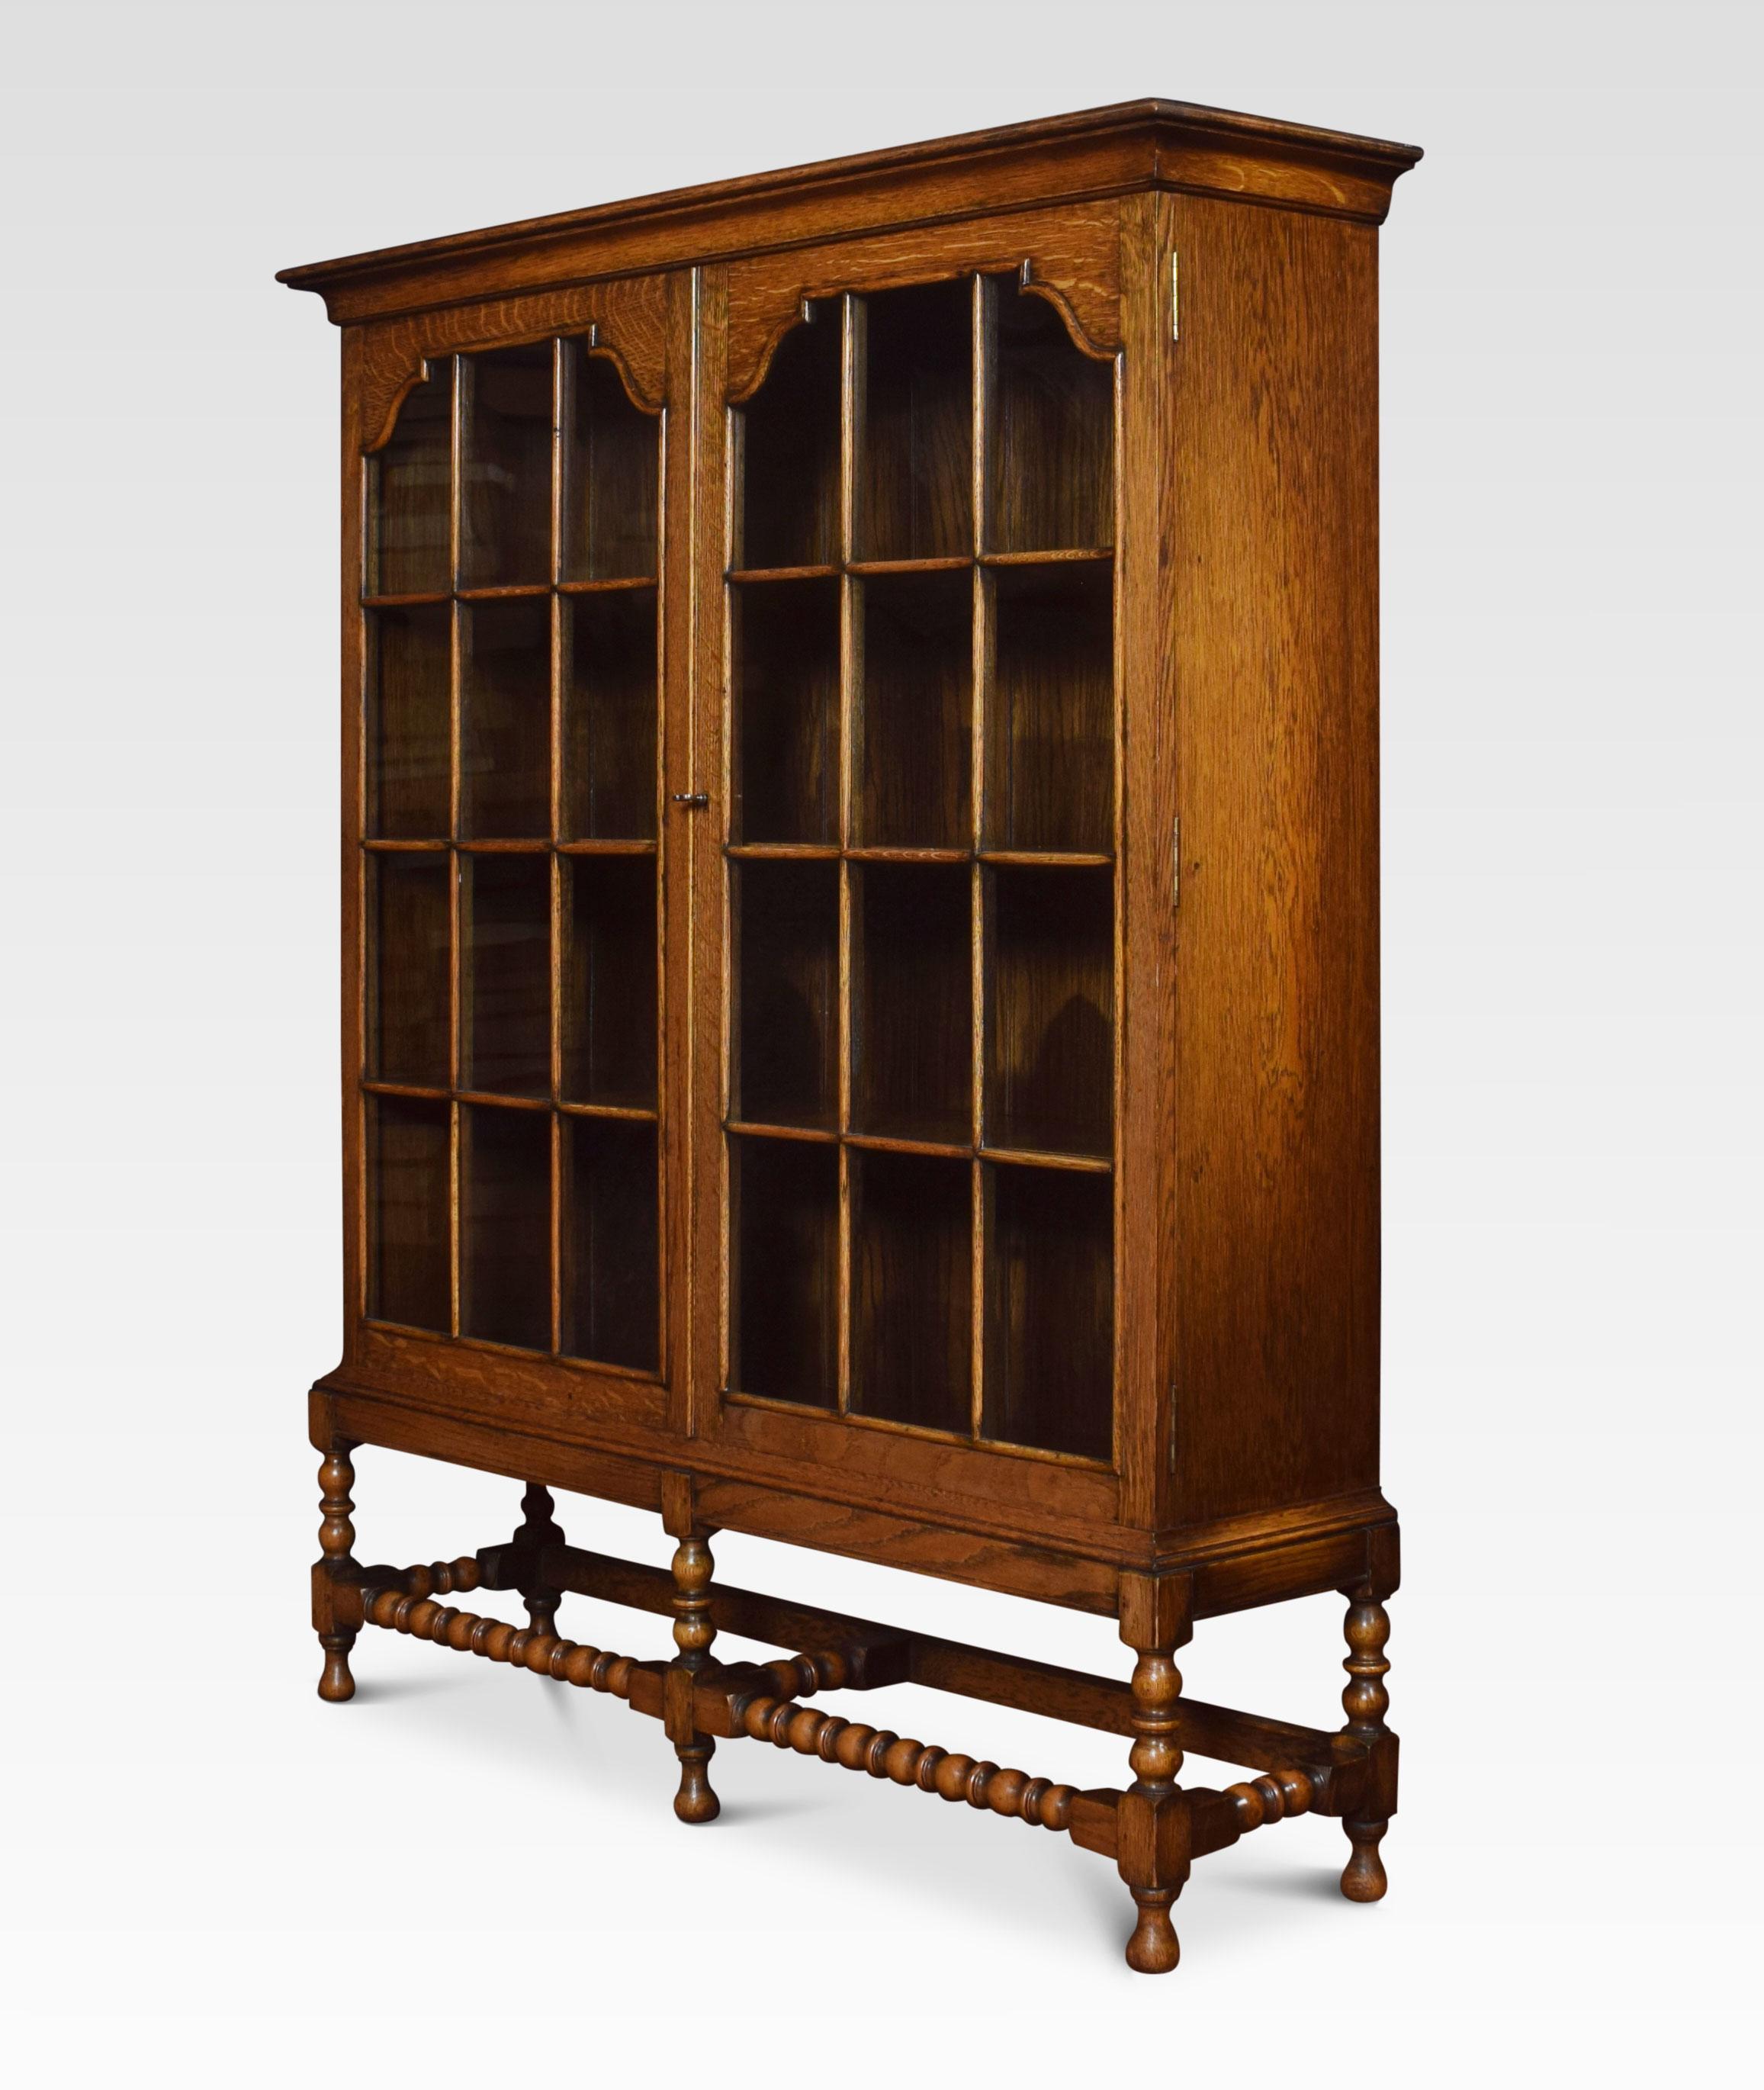 Oak bookcase the large rectangular top above two glazed beaded doors opening to reveal a shelved interior. All raised up on five barley twist supports united by stretchers.
Dimensions:
Height 54 inches
Width 44.5 inches
Depth 12 inches.